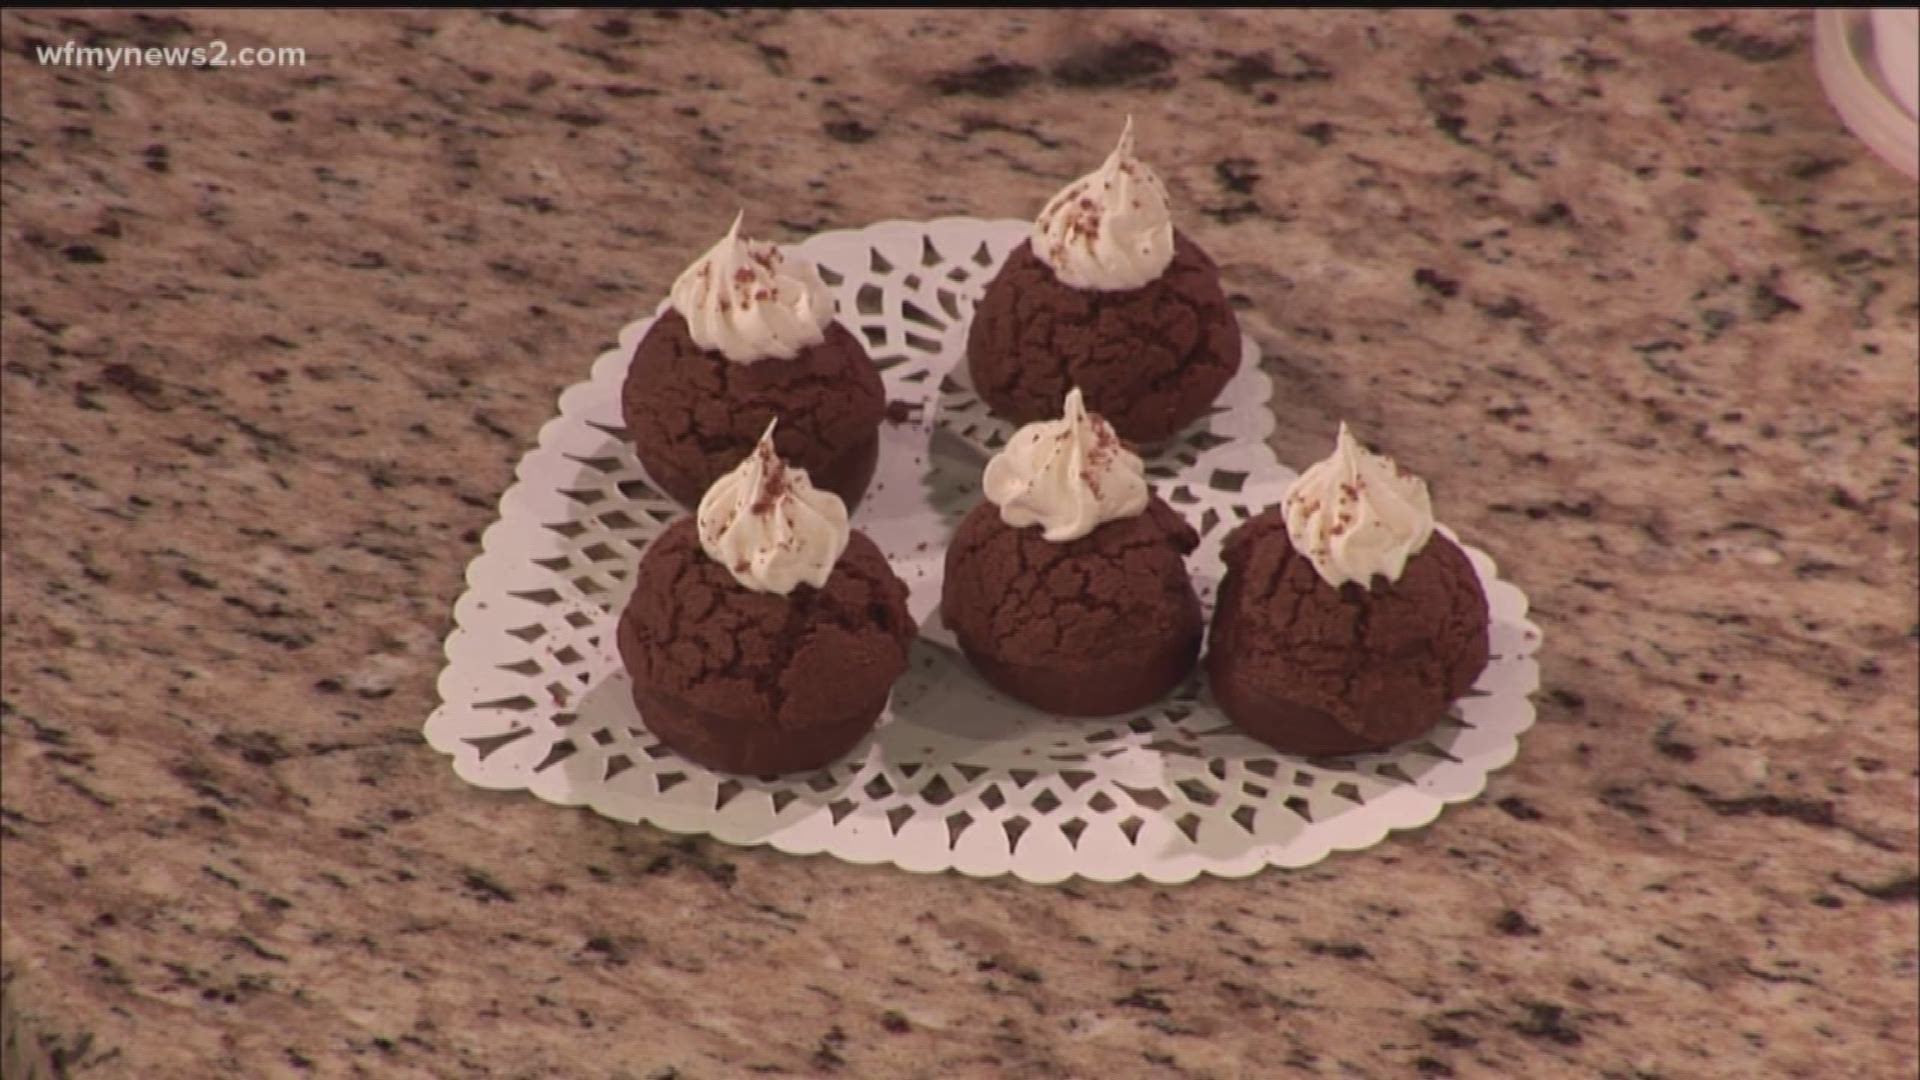 The 11th Annual Cheers for Chocolate Festival raises money to help Christmas Cheer and Alamance County continue their mission of helping underprivileged children.